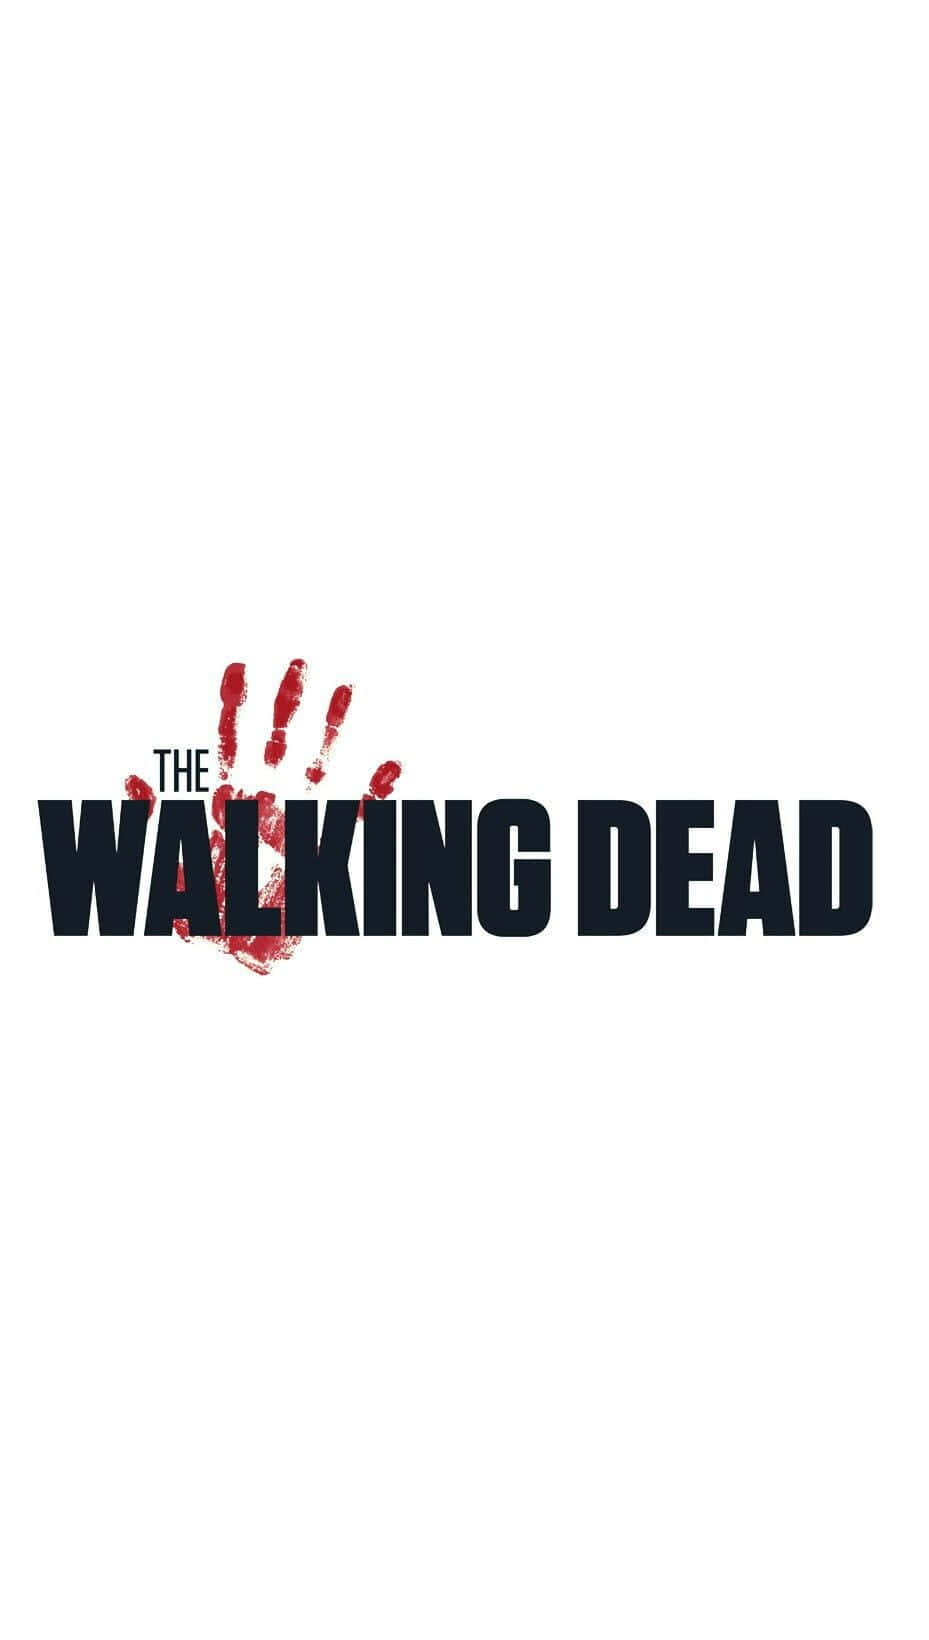 Survive the zombie apocalypse with the The Walking Dead iPhone Wallpaper